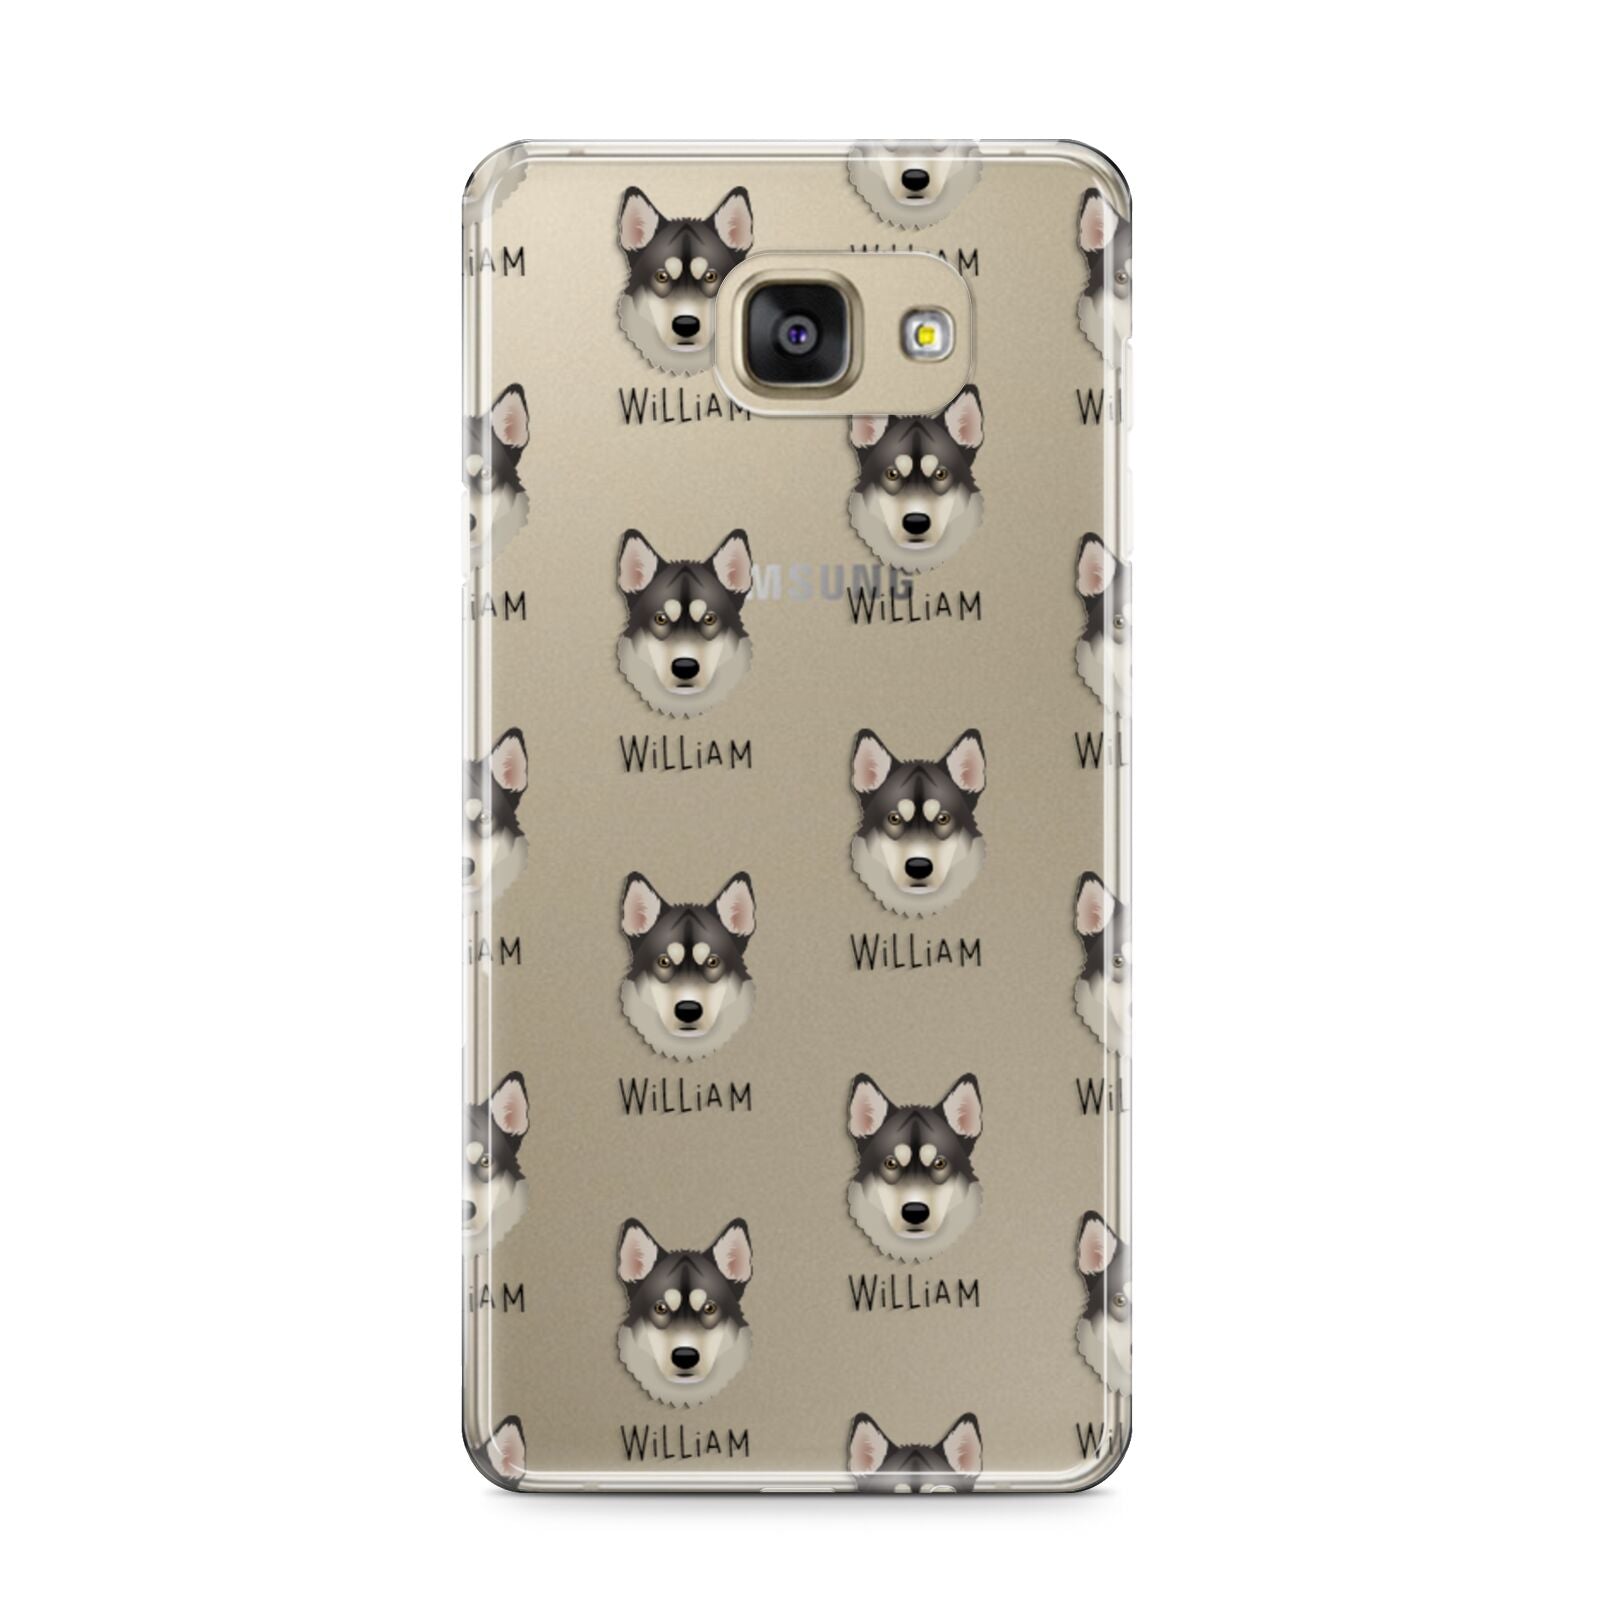 Tamaskan Icon with Name Samsung Galaxy A9 2016 Case on gold phone